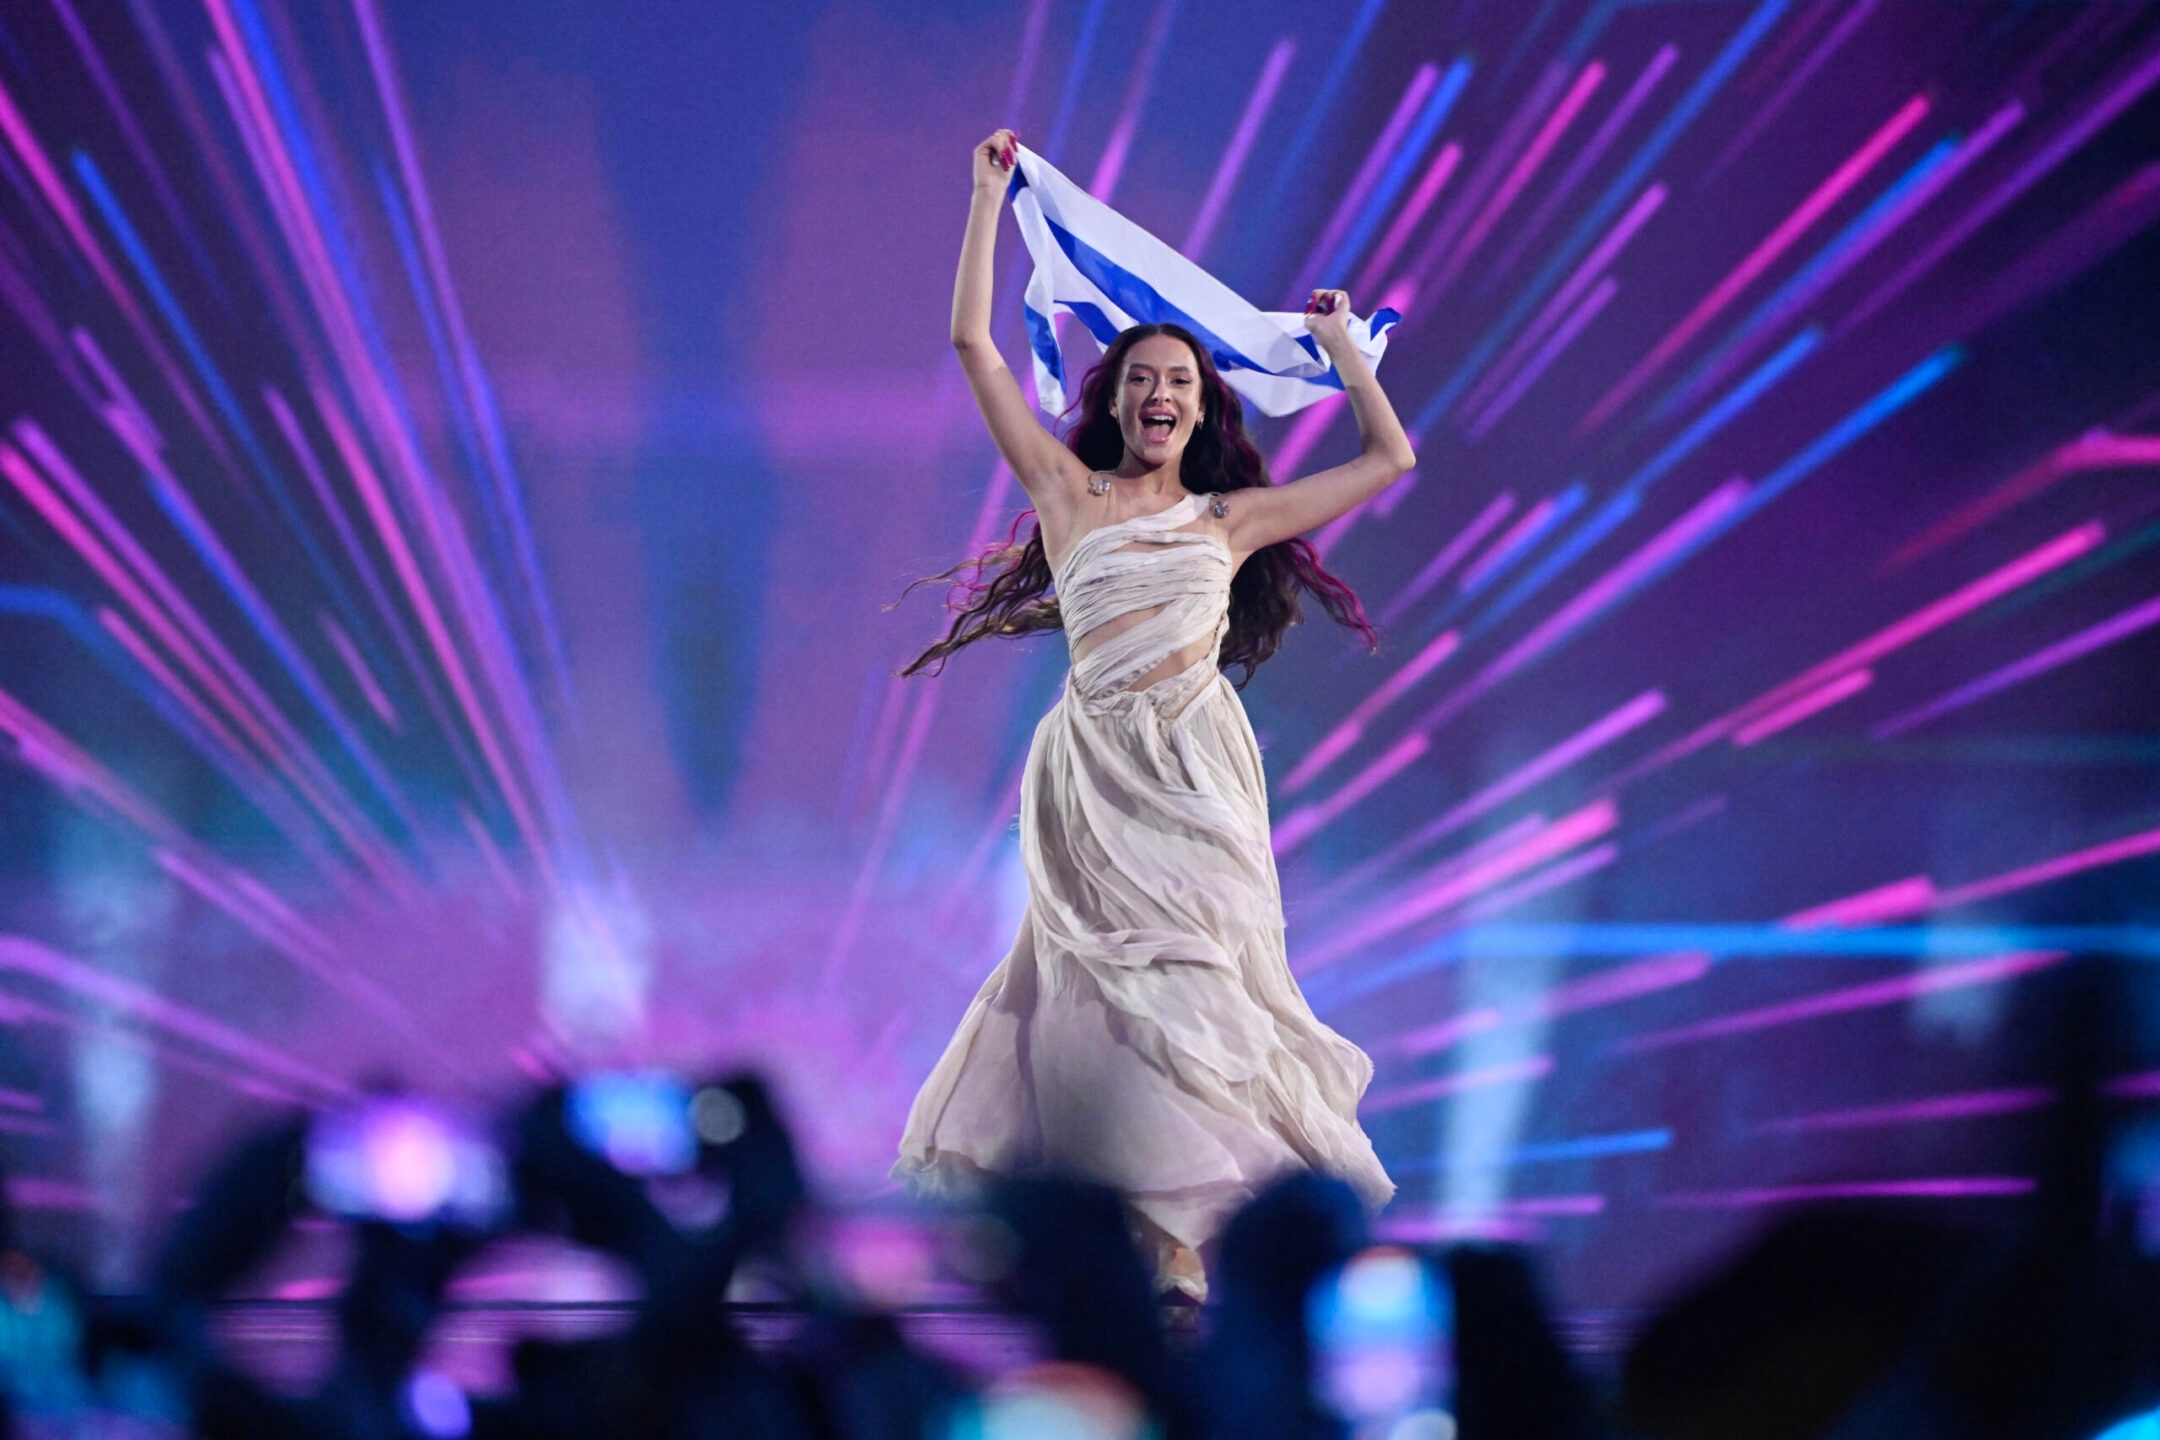 Israel places 5th at Eurovision, propelled by audience voting from around the world